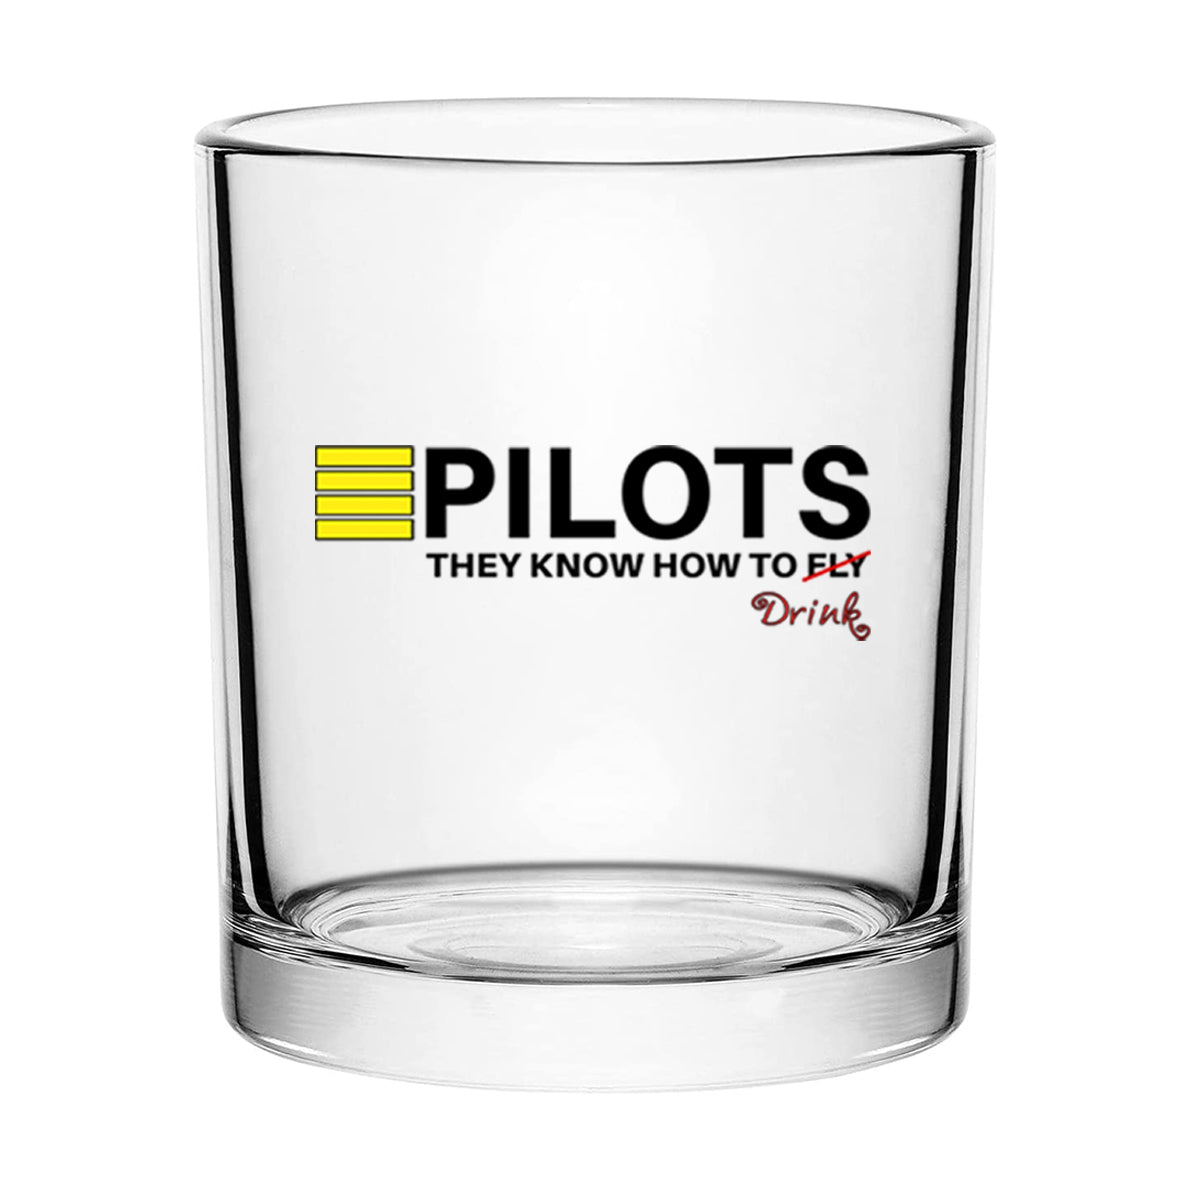 Pilots They Know How To Drink Designed Special Whiskey Glasses